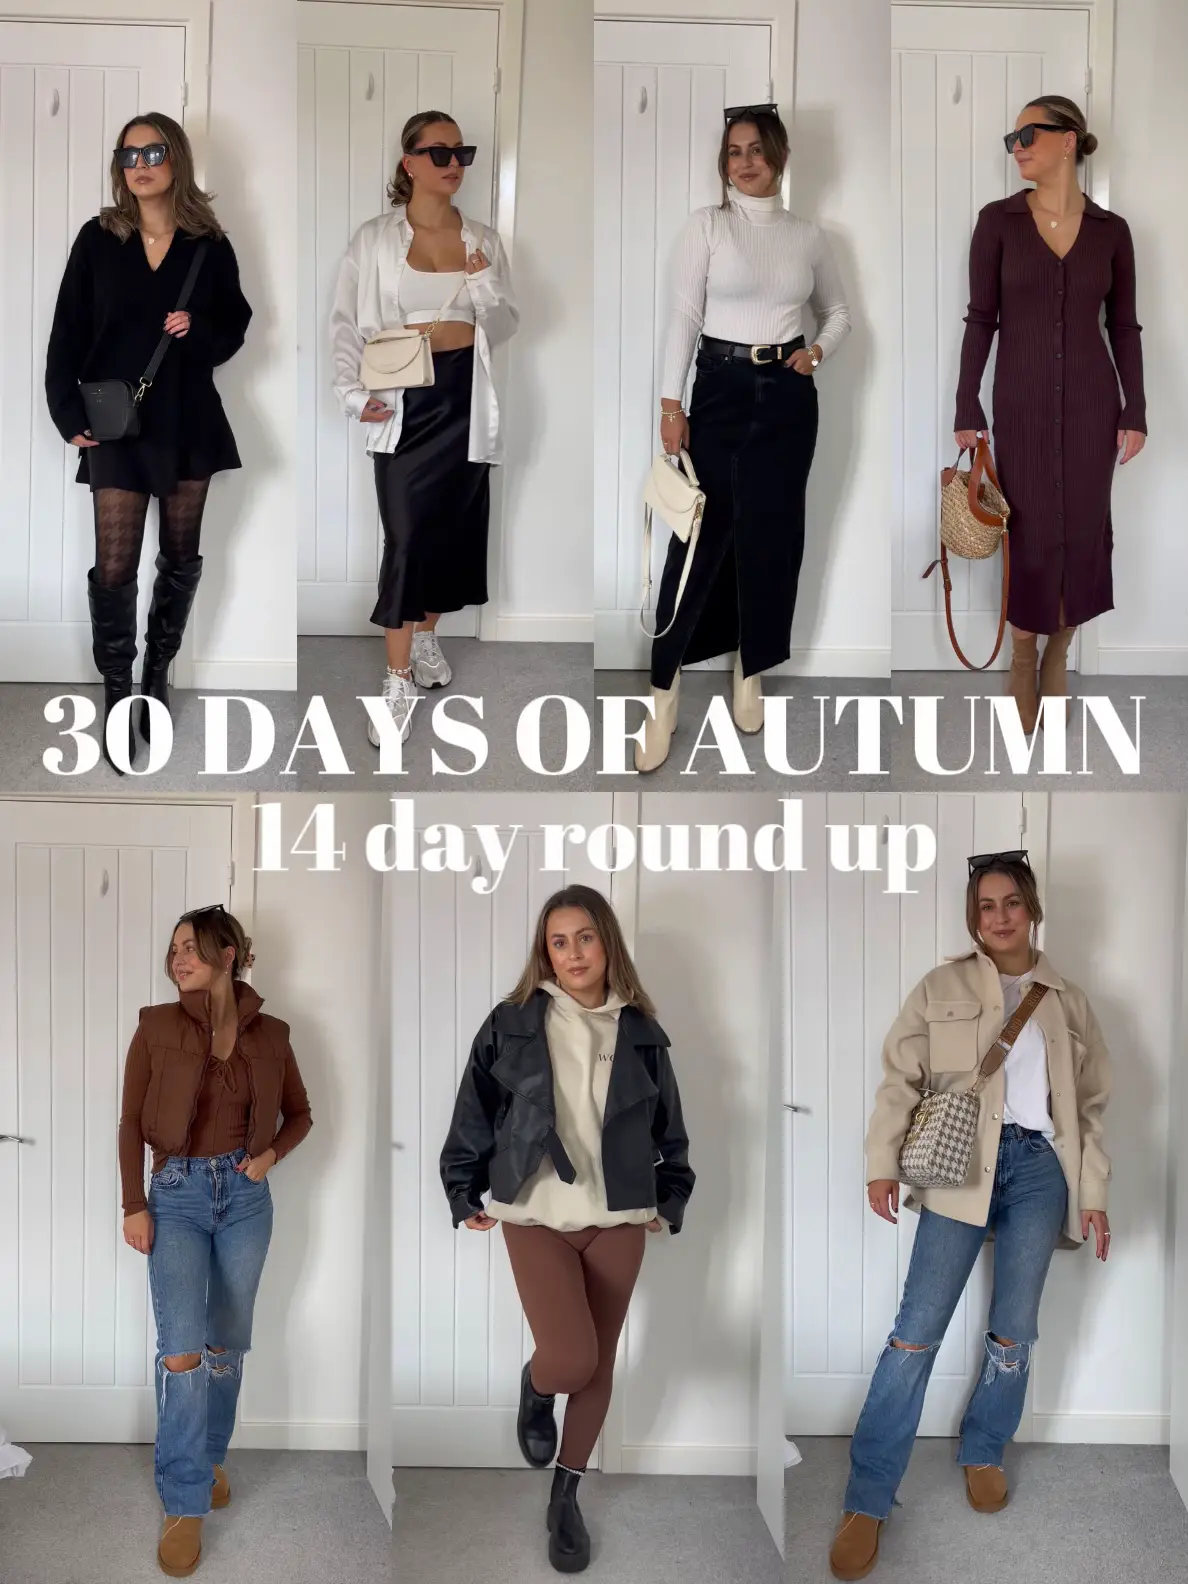 Fashion Tips for Autumn Outfits - Lemon8 Search